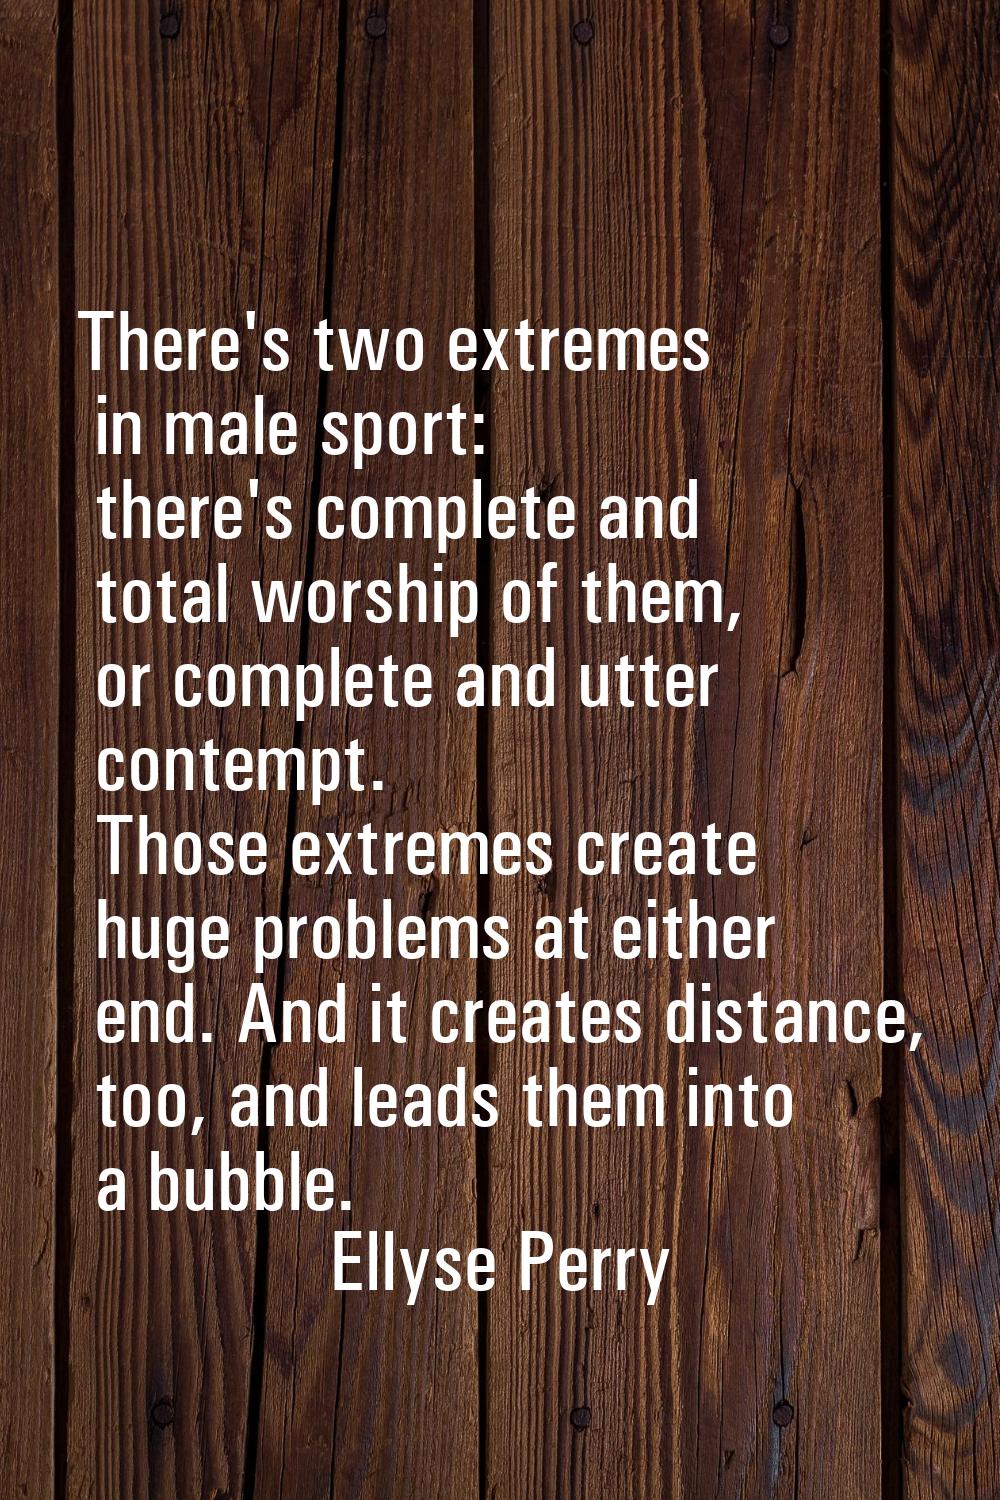 There's two extremes in male sport: there's complete and total worship of them, or complete and utt